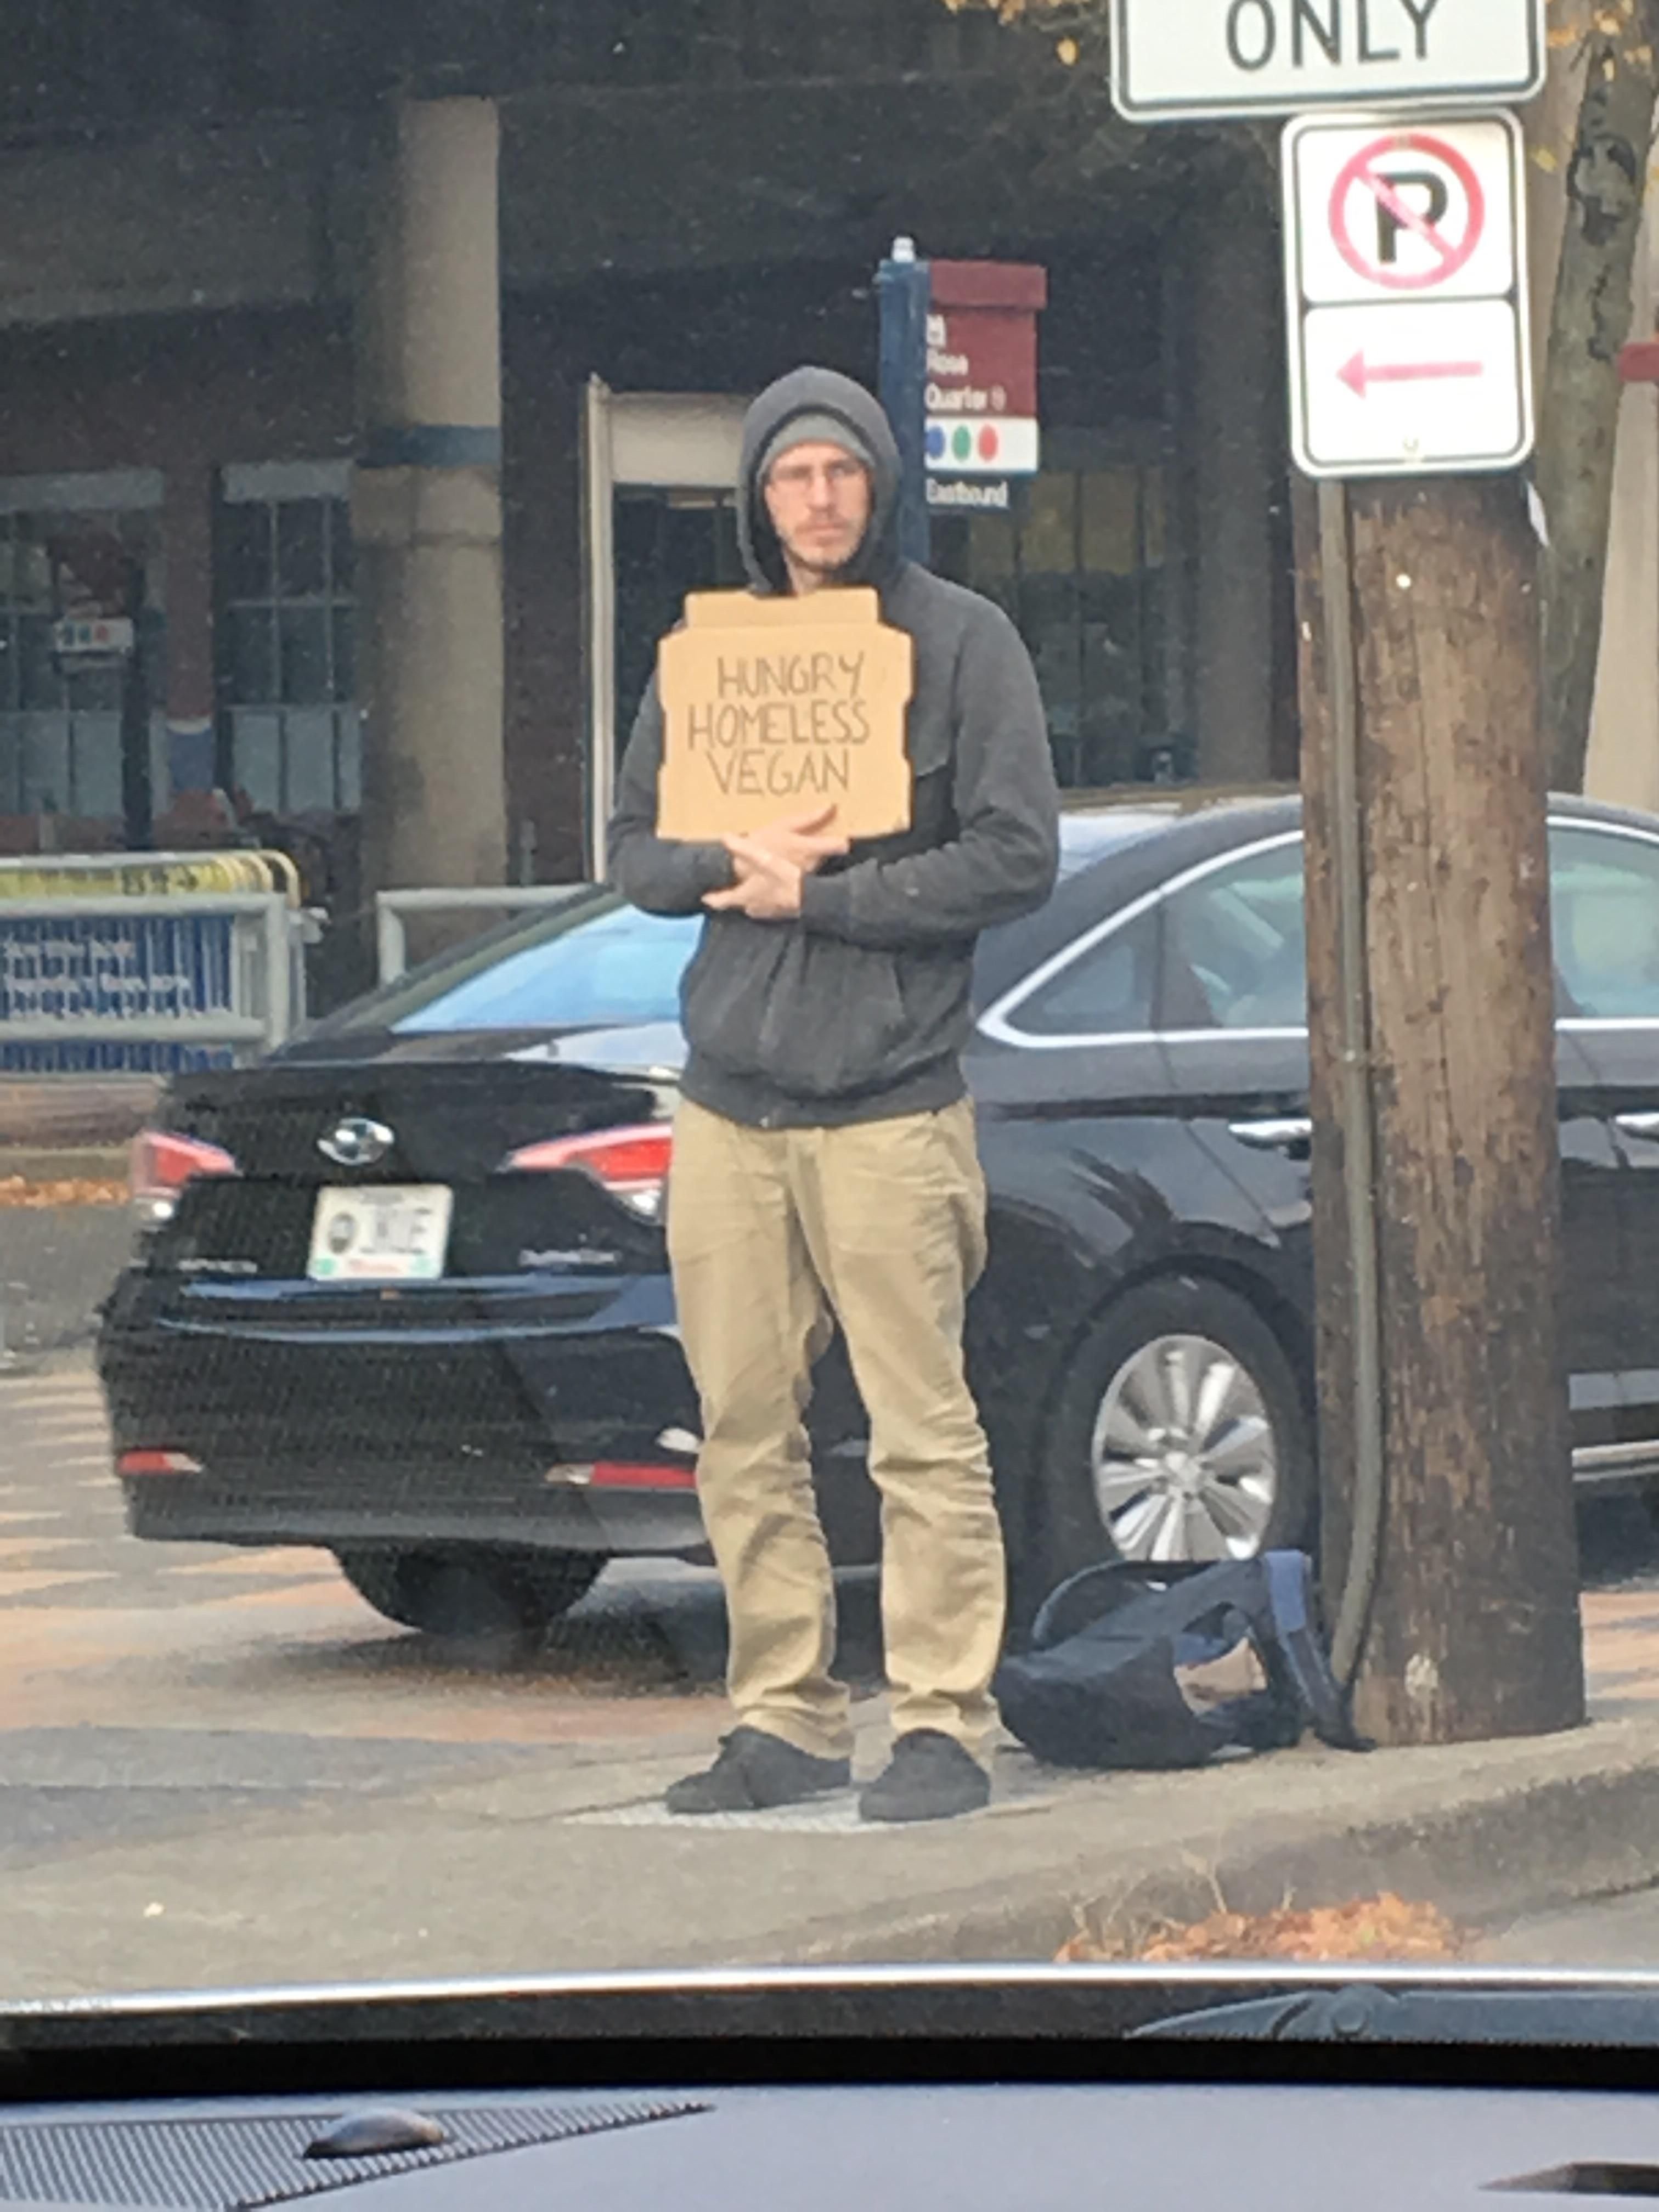 I guess beggars CAN be choosers.